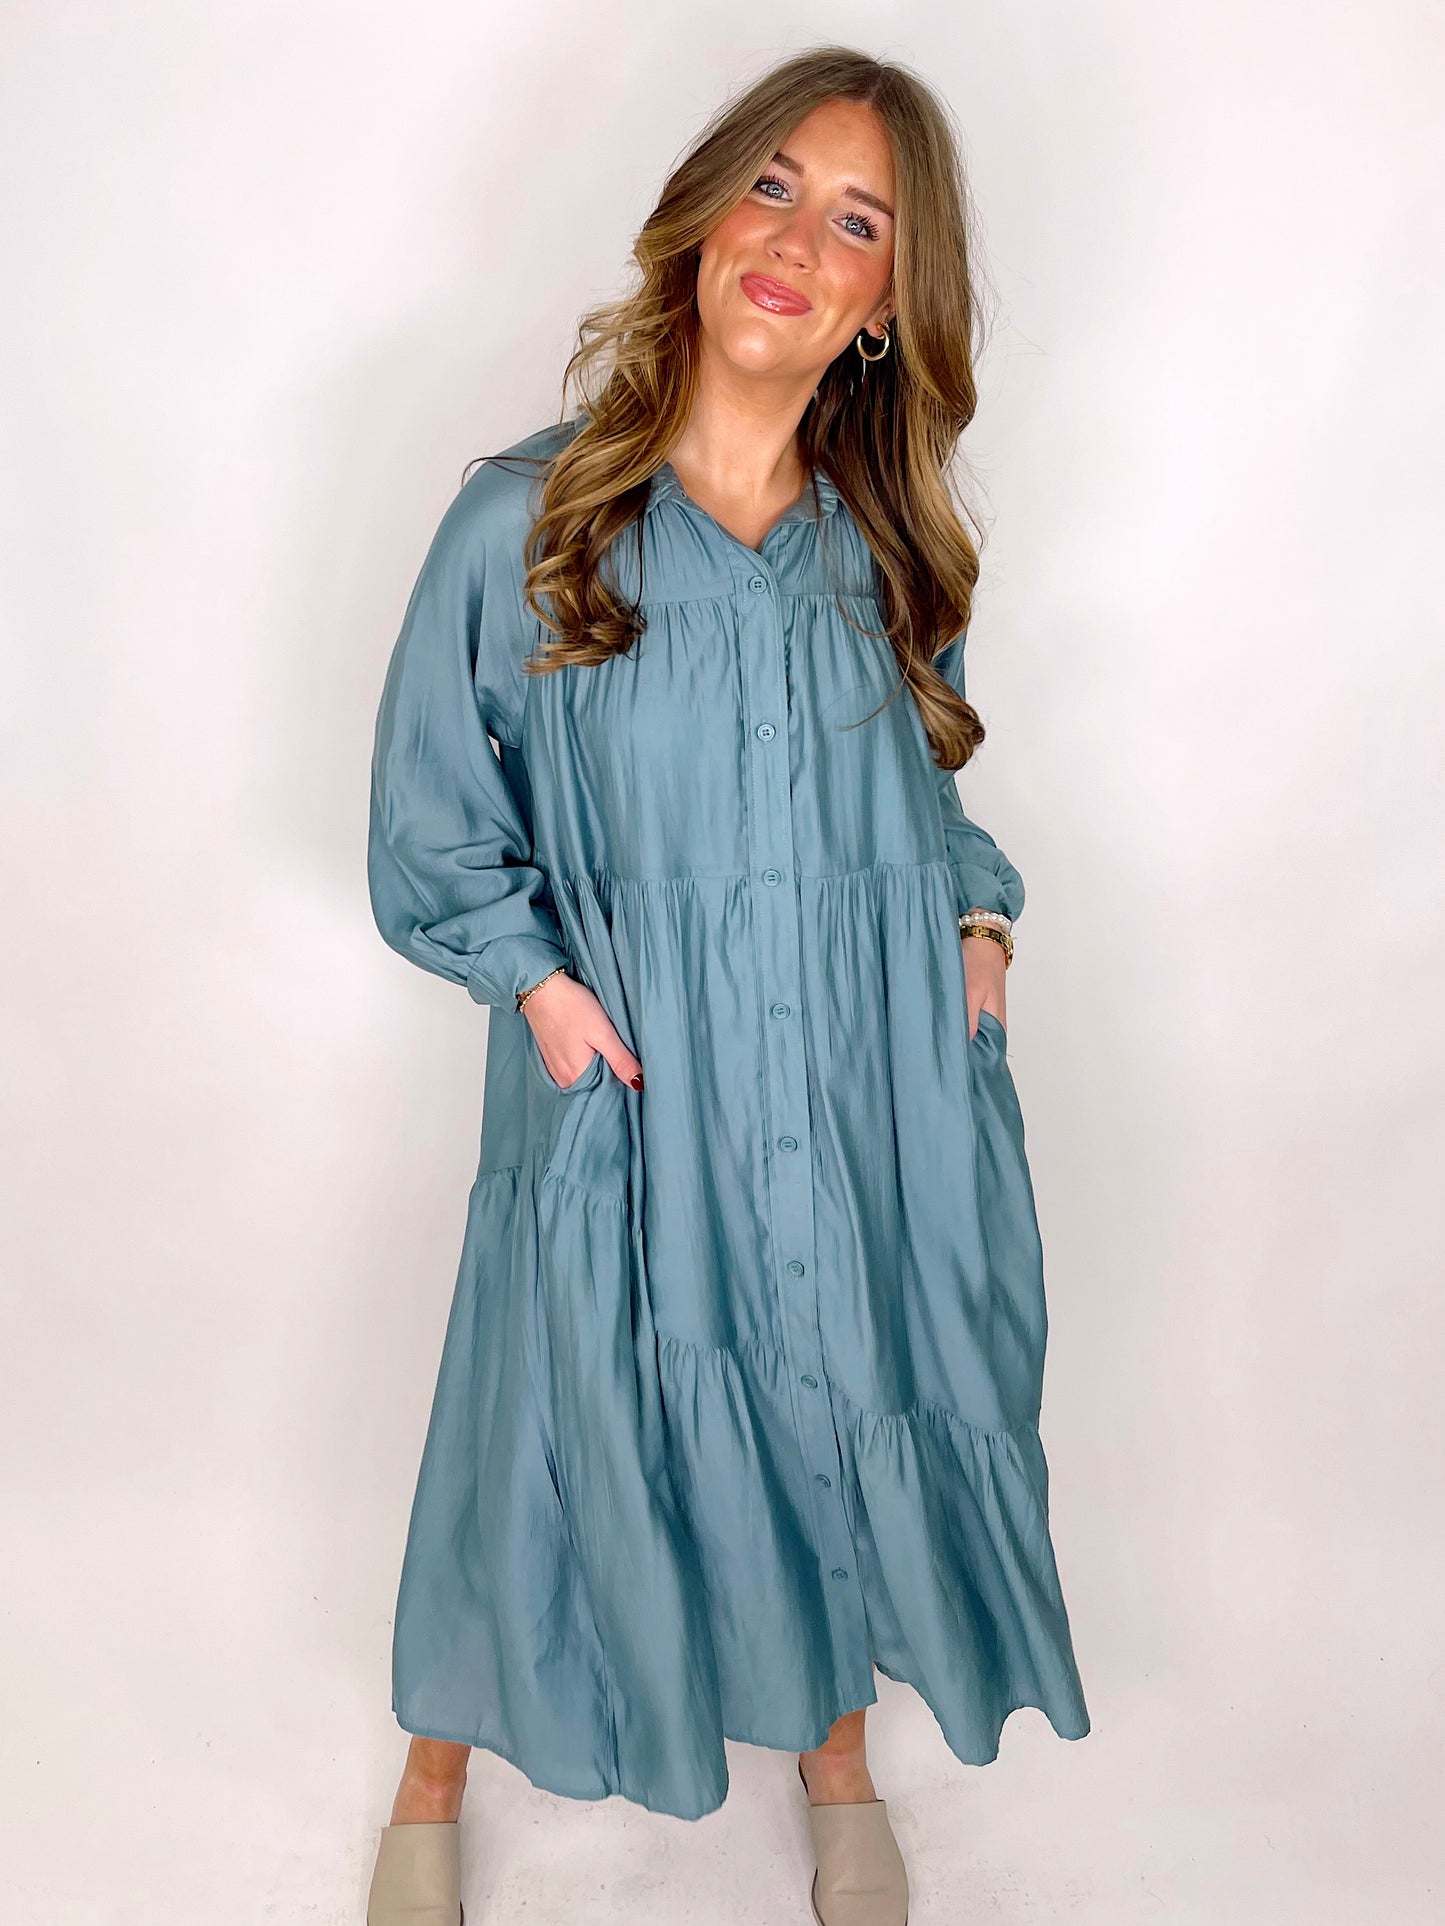 The Cassidy Midi Dress-Midi Dress-&merci-The Village Shoppe, Women’s Fashion Boutique, Shop Online and In Store - Located in Muscle Shoals, AL.